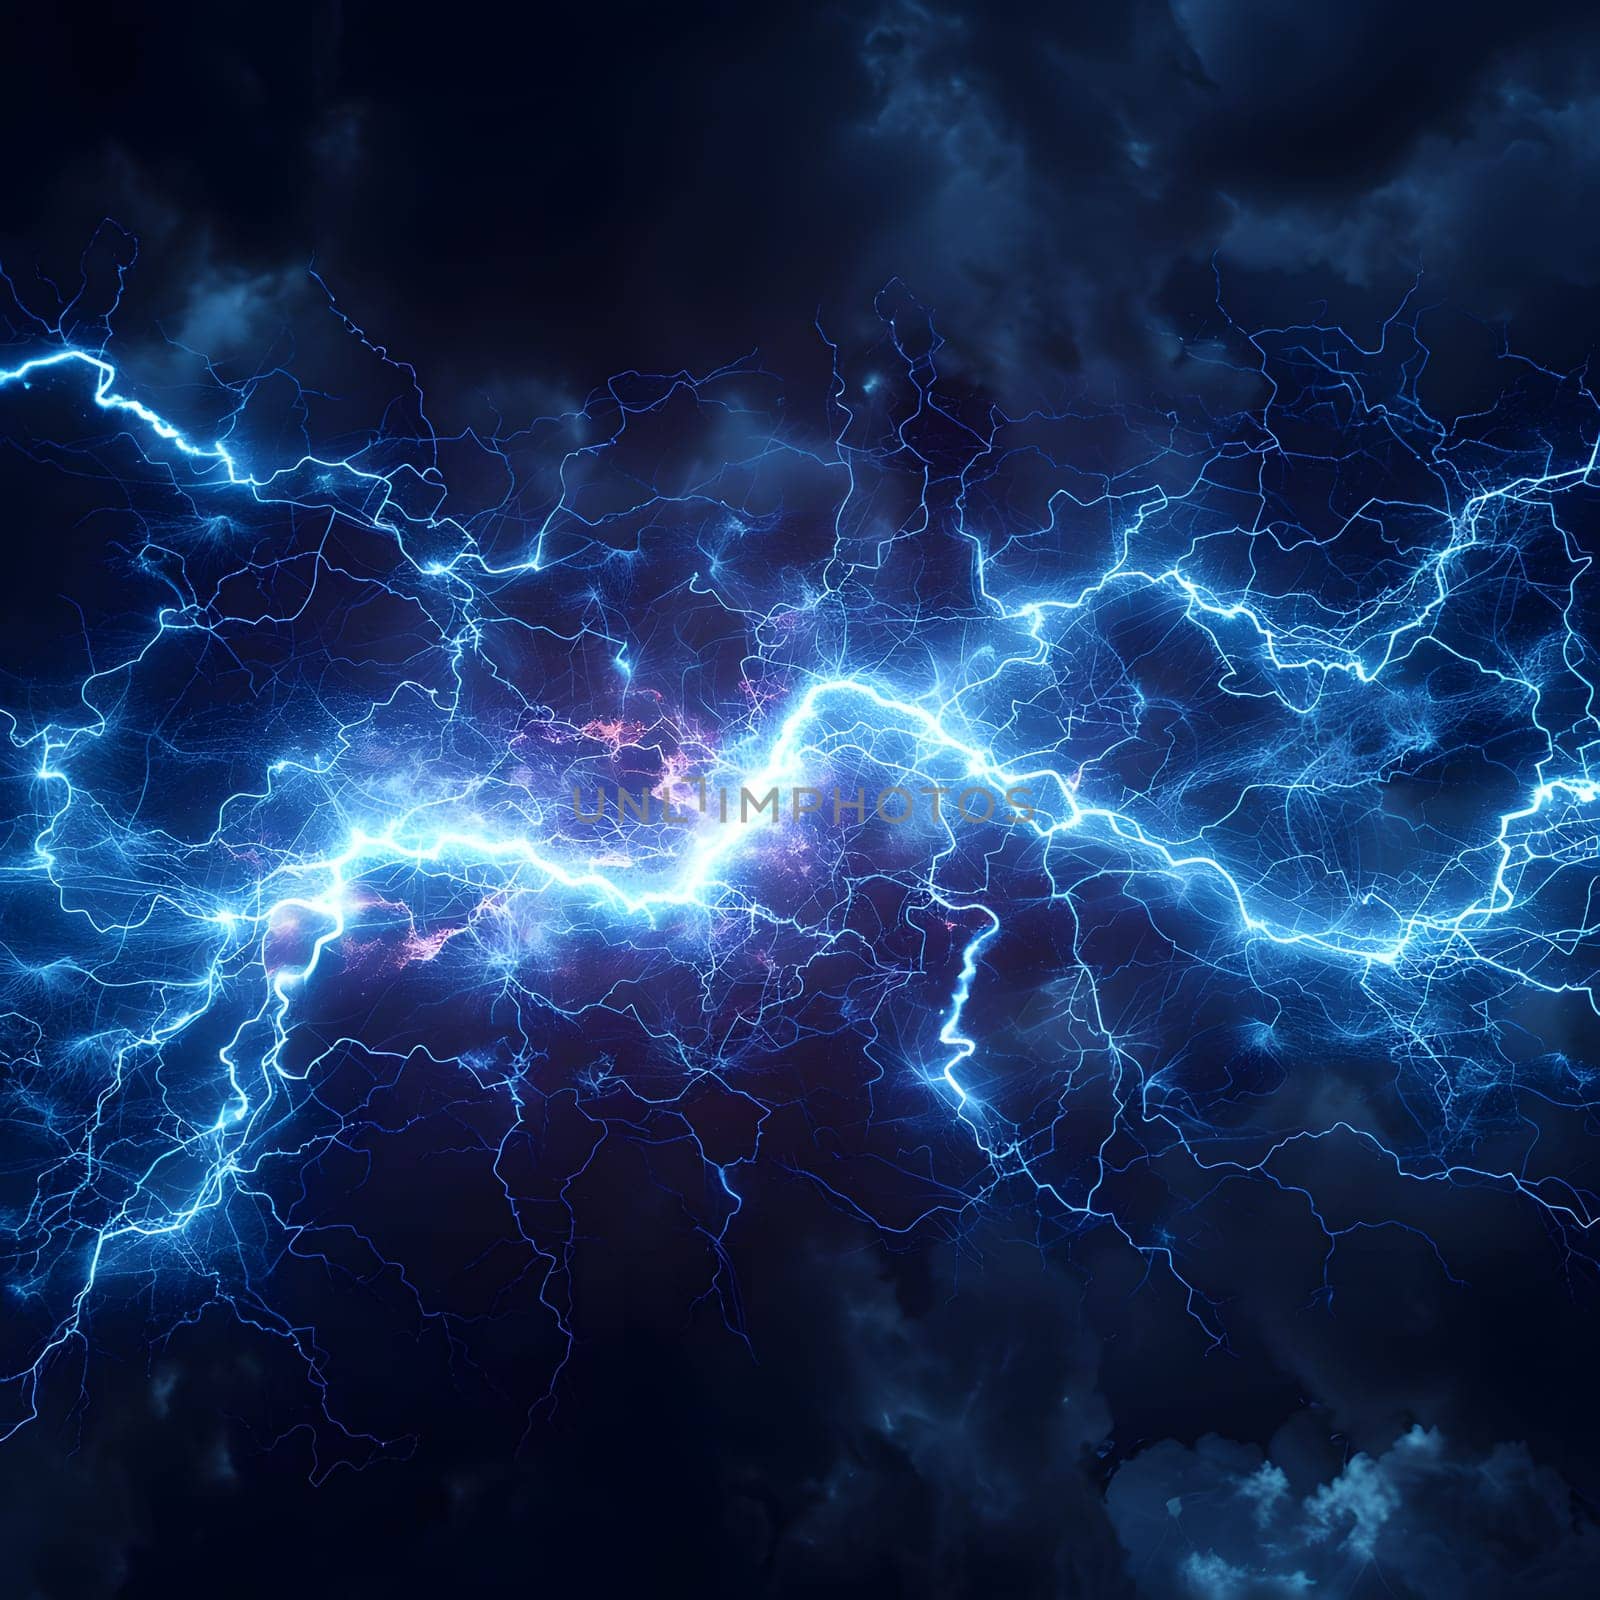 Electric blue lightning bolt cuts through the dark purple cloudy sky by Nadtochiy